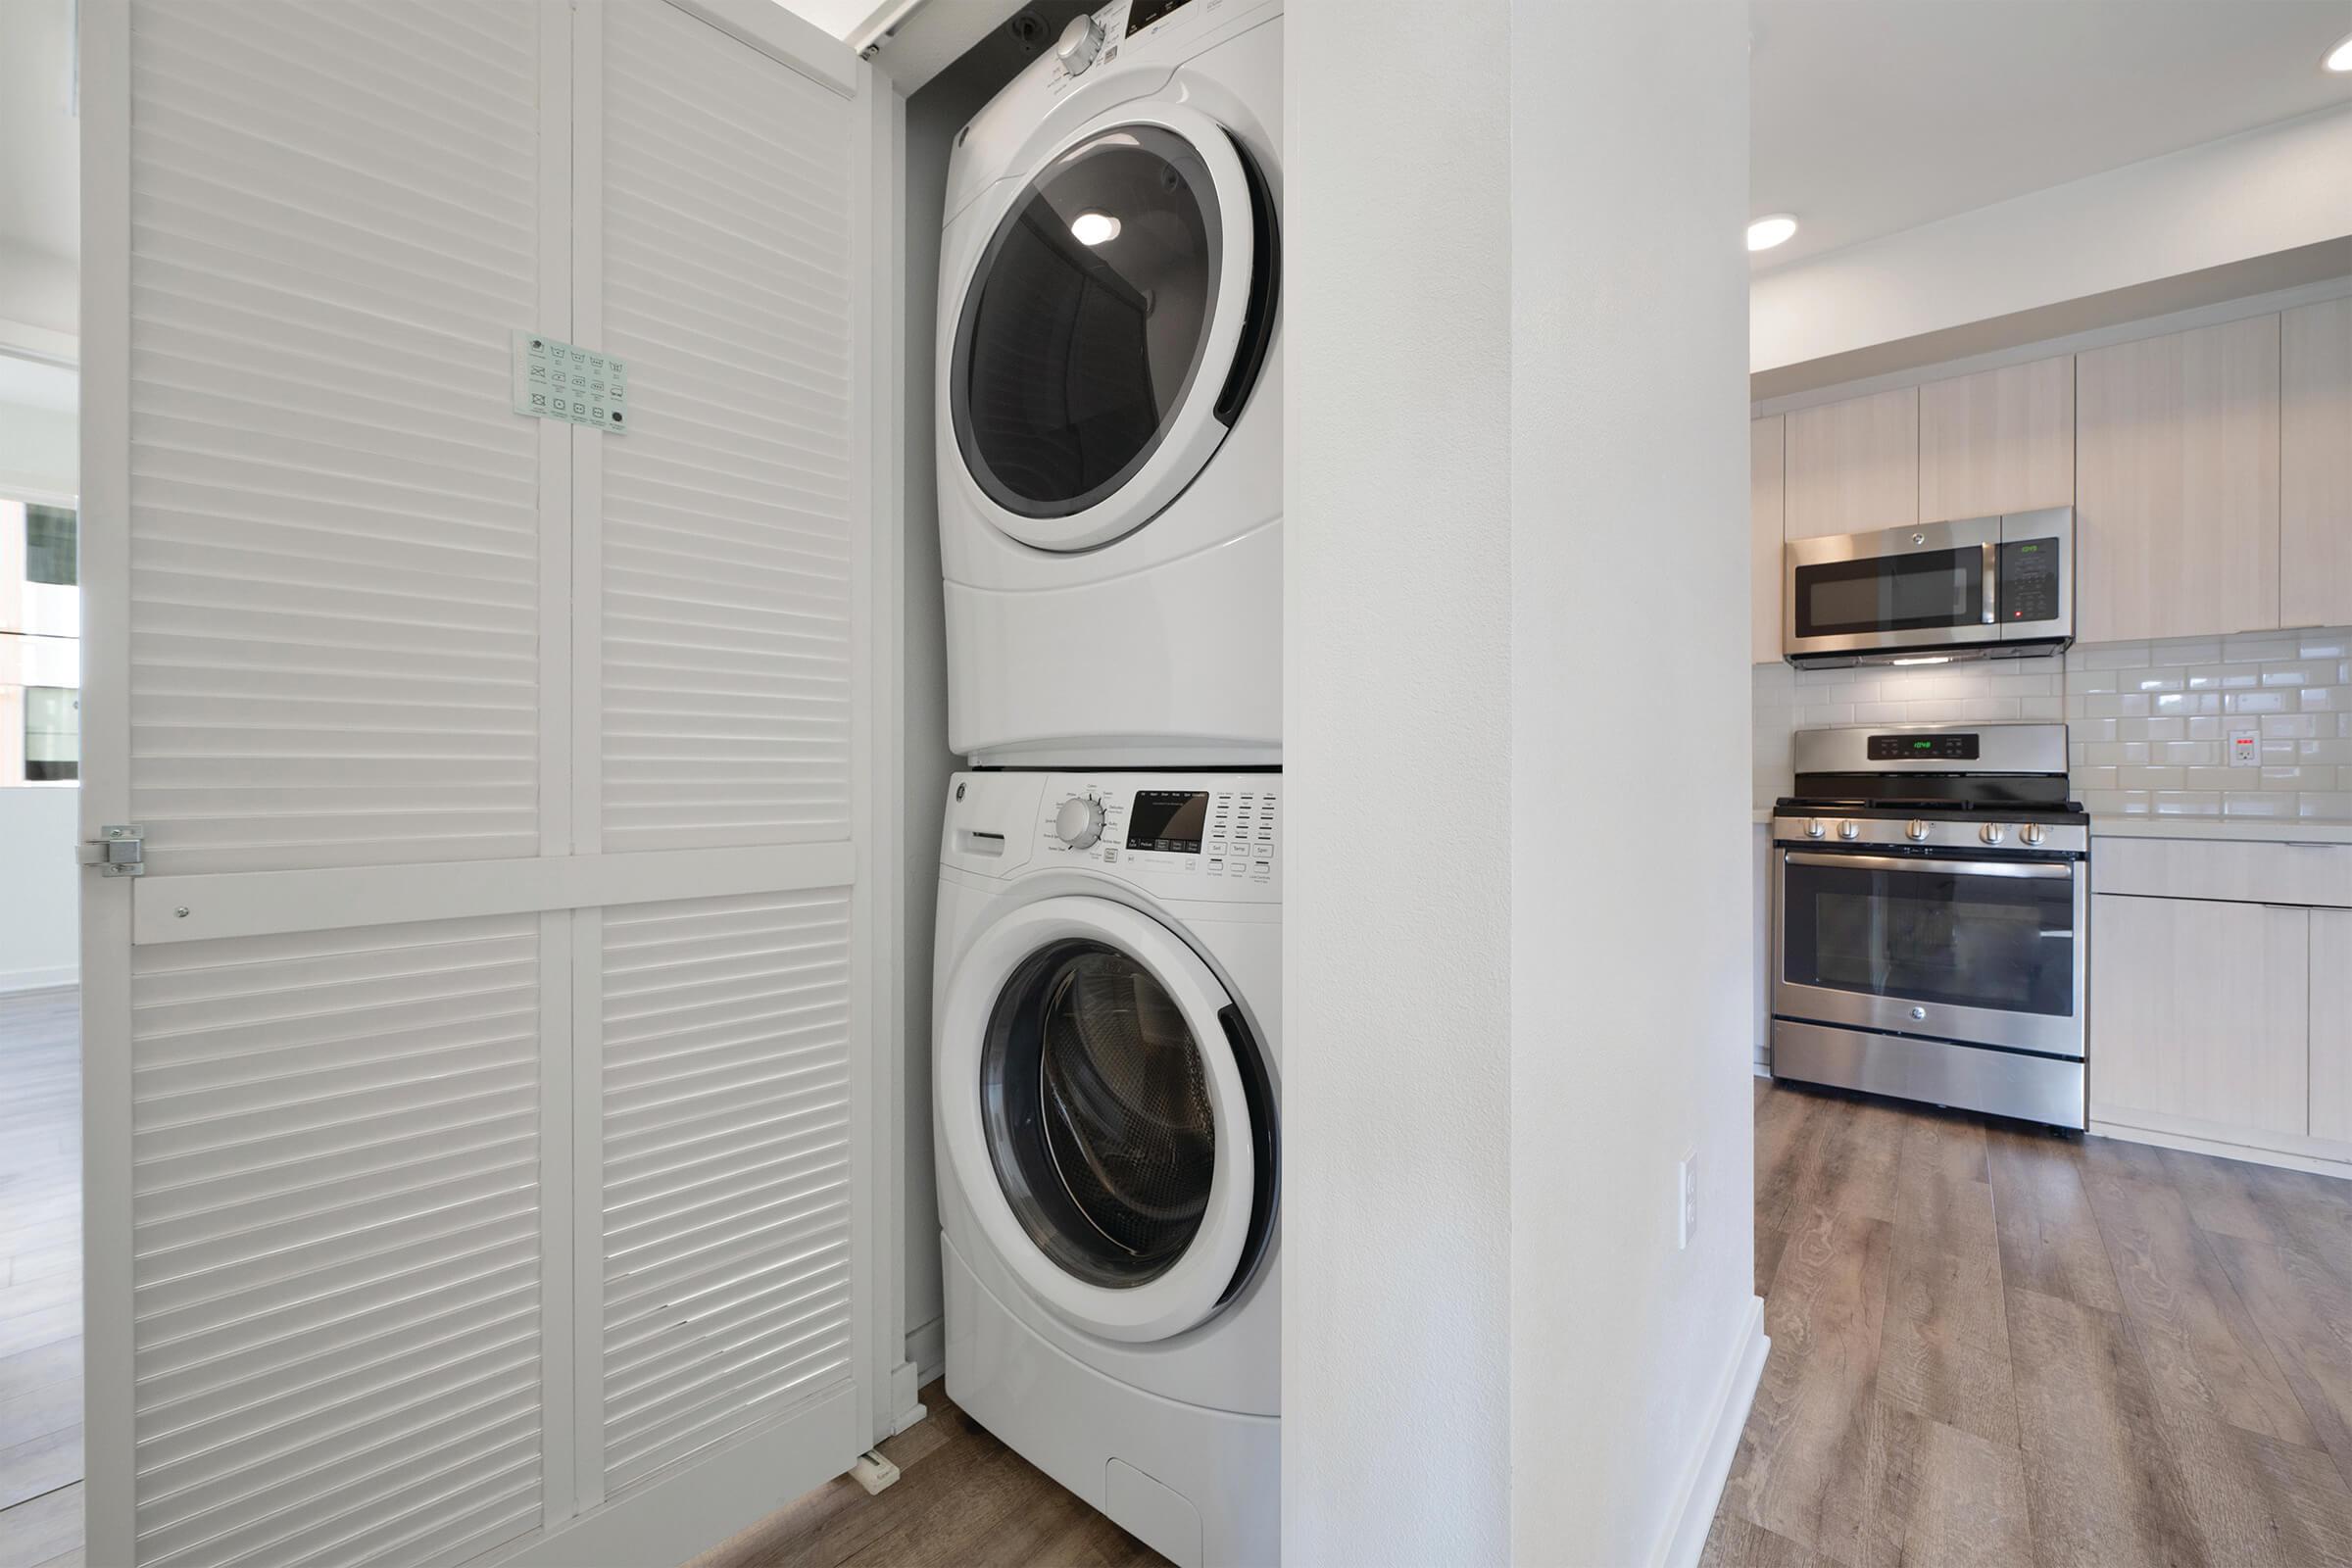 We offer a full-size front-loading washer and dryer